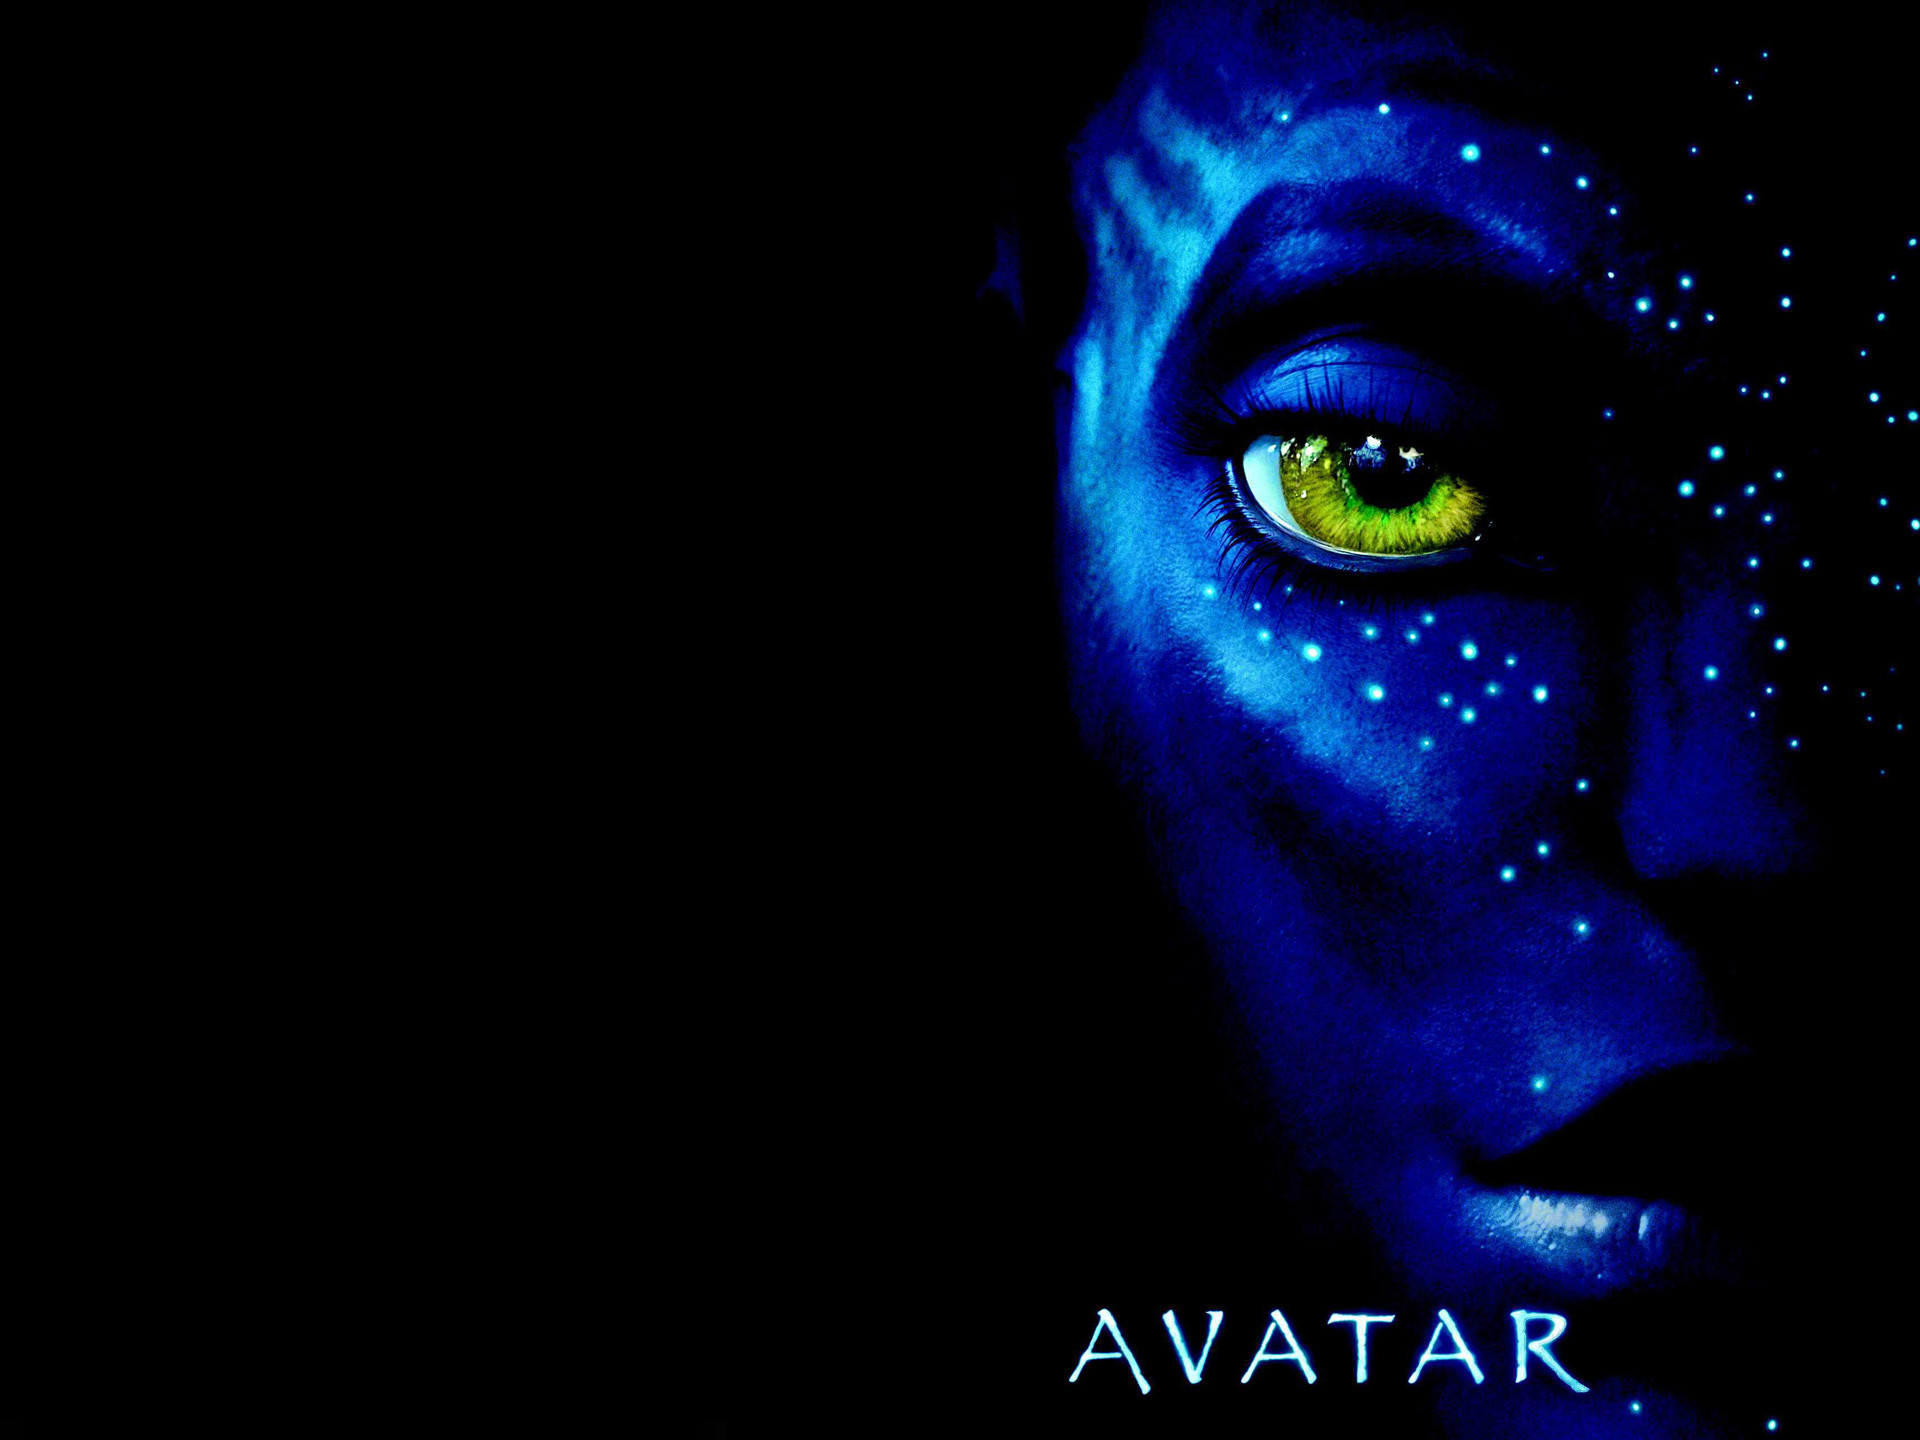 1920x1440 Official Avatar Movie Poster Wallpaper